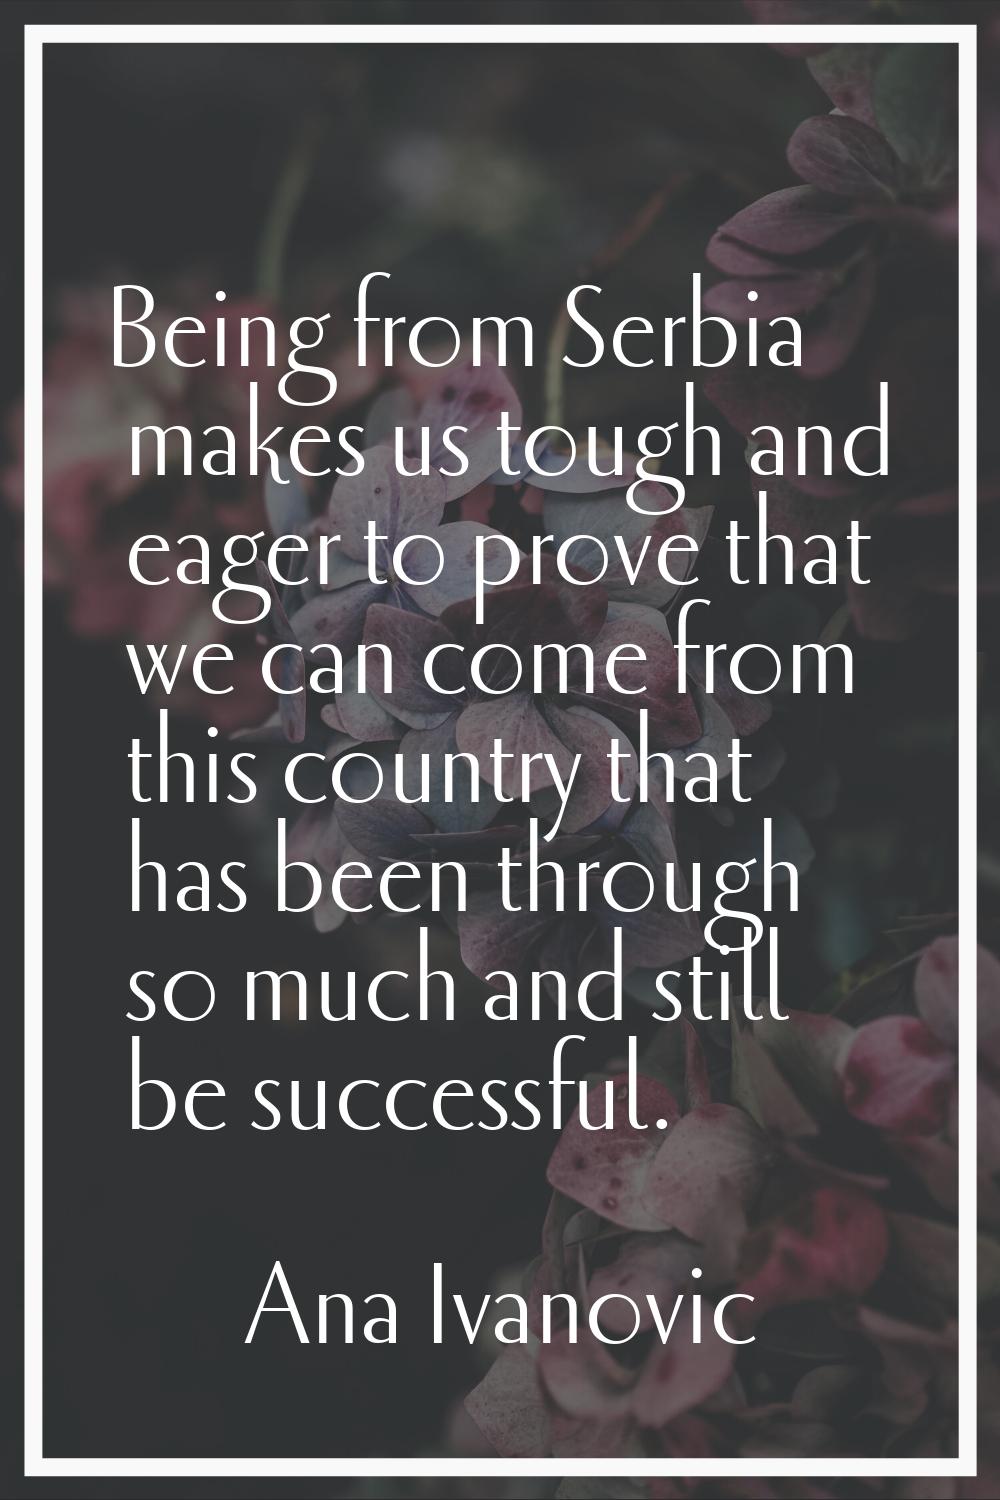 Being from Serbia makes us tough and eager to prove that we can come from this country that has bee